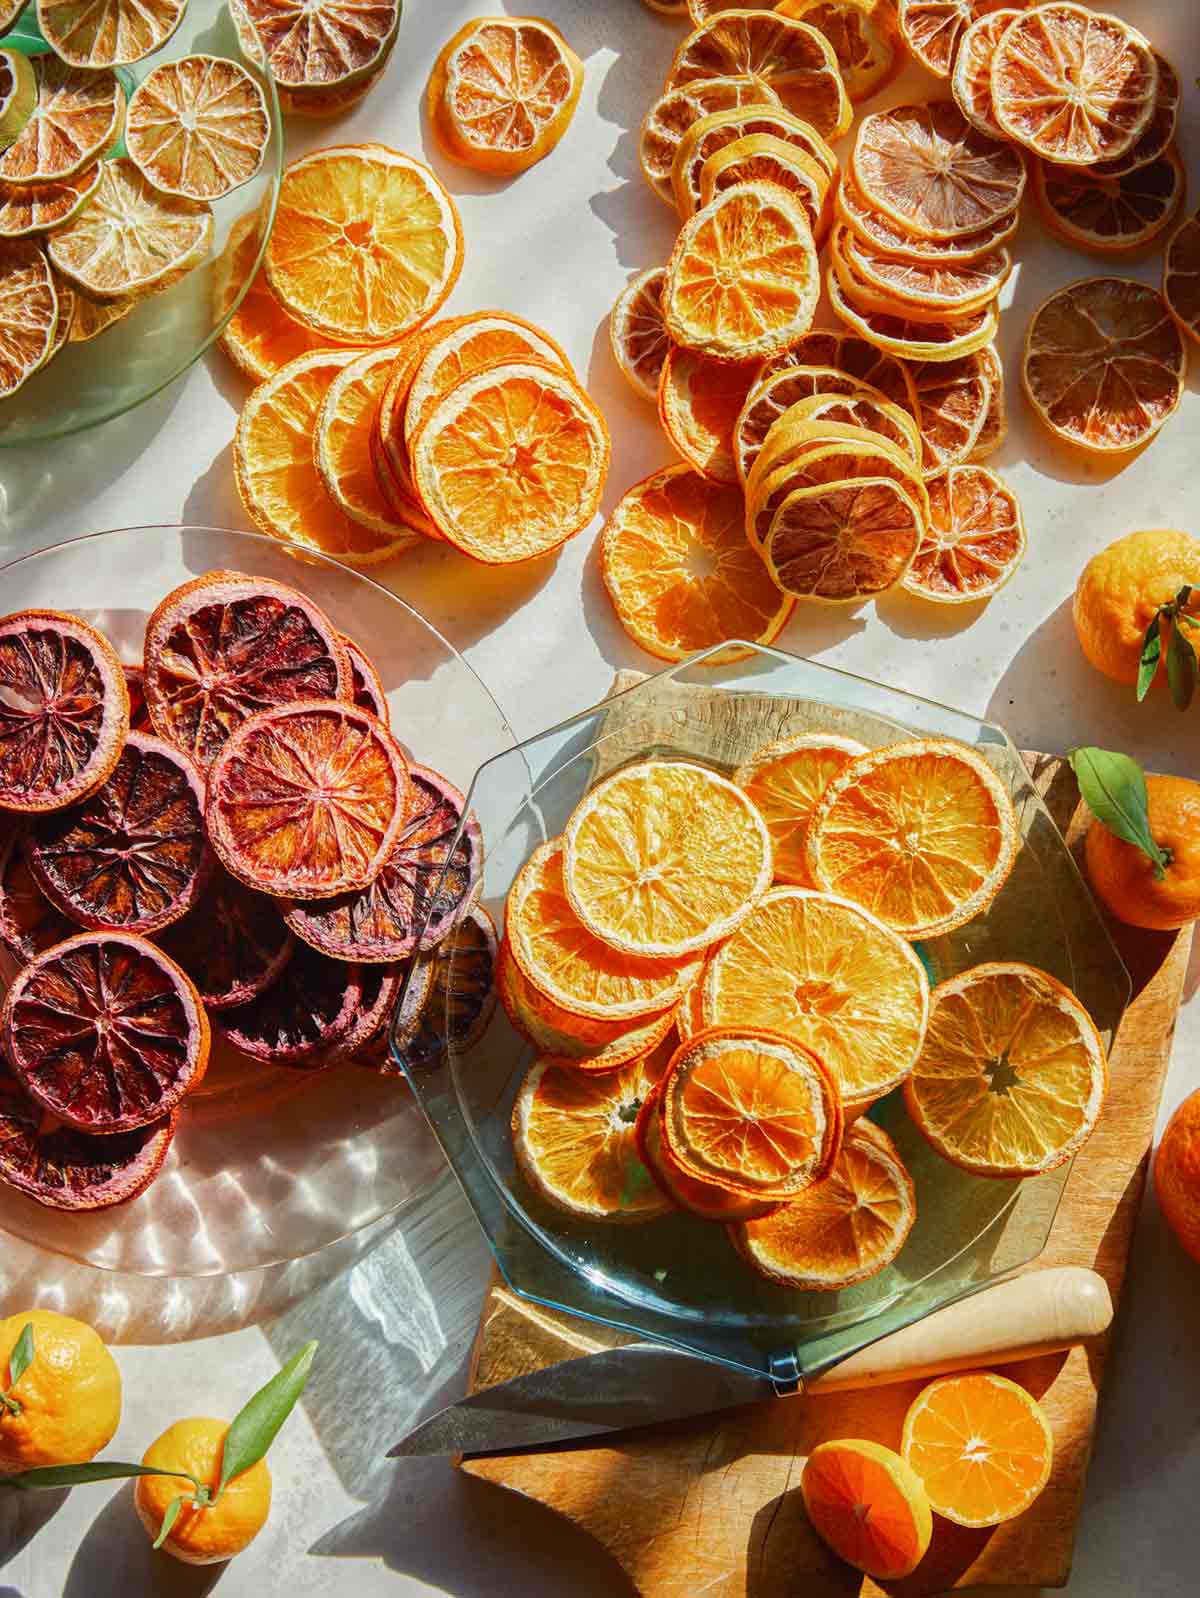 Do Dehydrated Citrus Wheels Add Anything to Drinks?